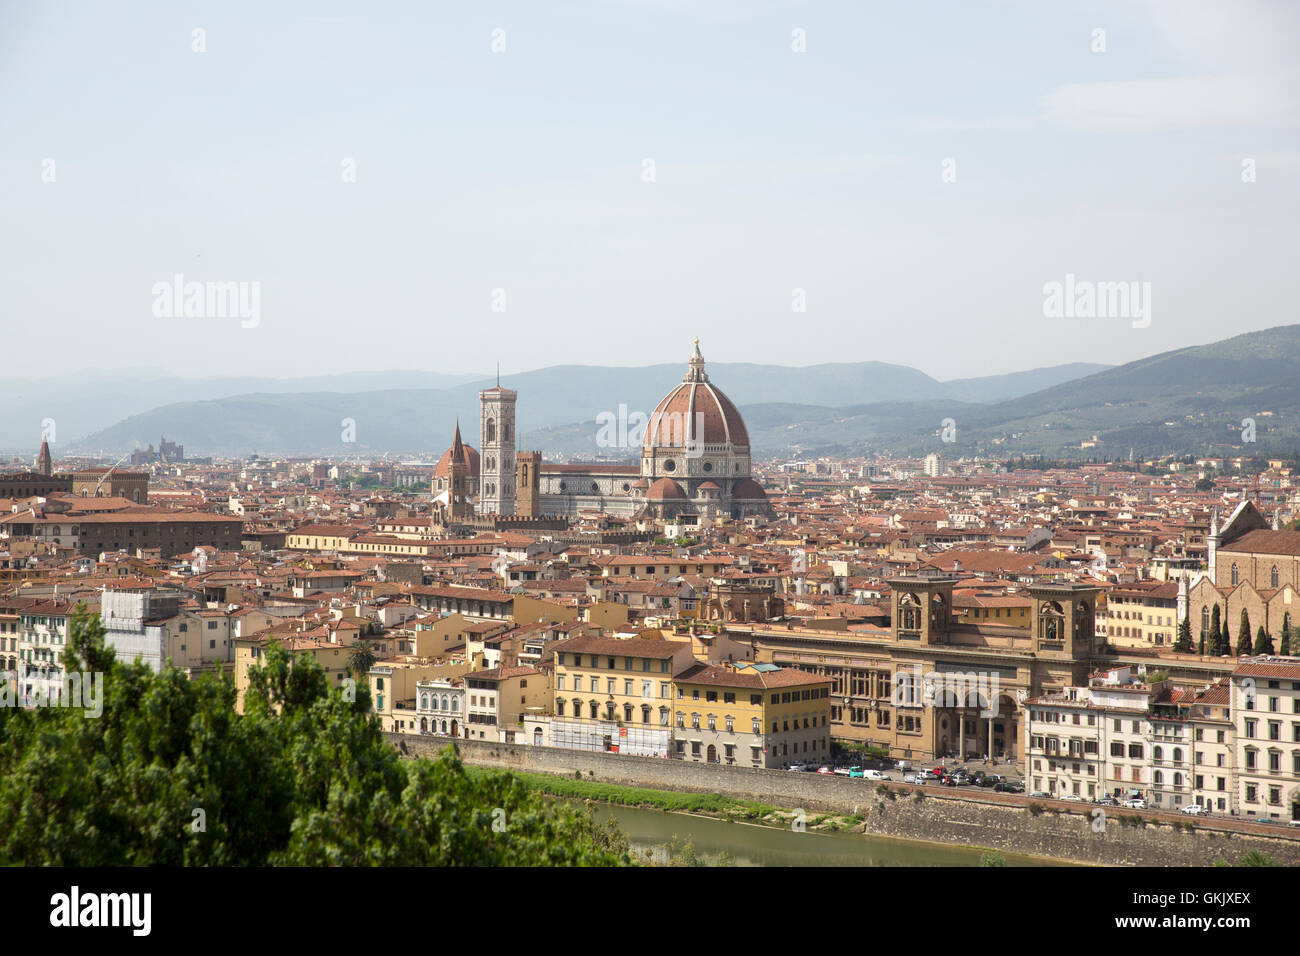 A view of Florence, looking towards Cattedrale di Santa Maria del Fiore Stock Photo